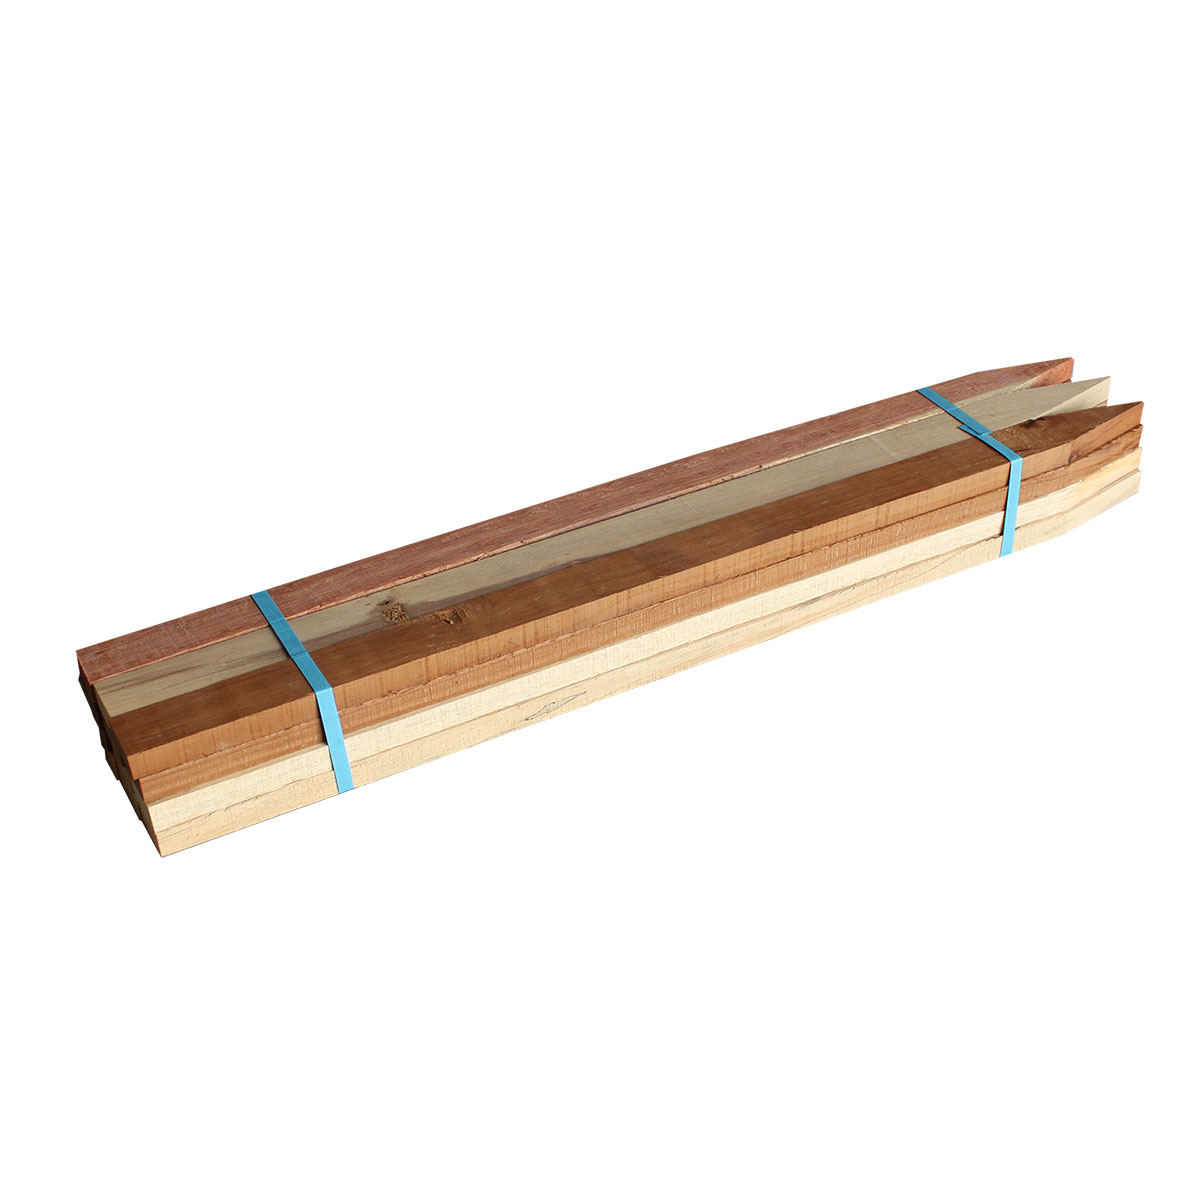 Hardwood Stakes 50 x 25 x 600mm - 12 Pack